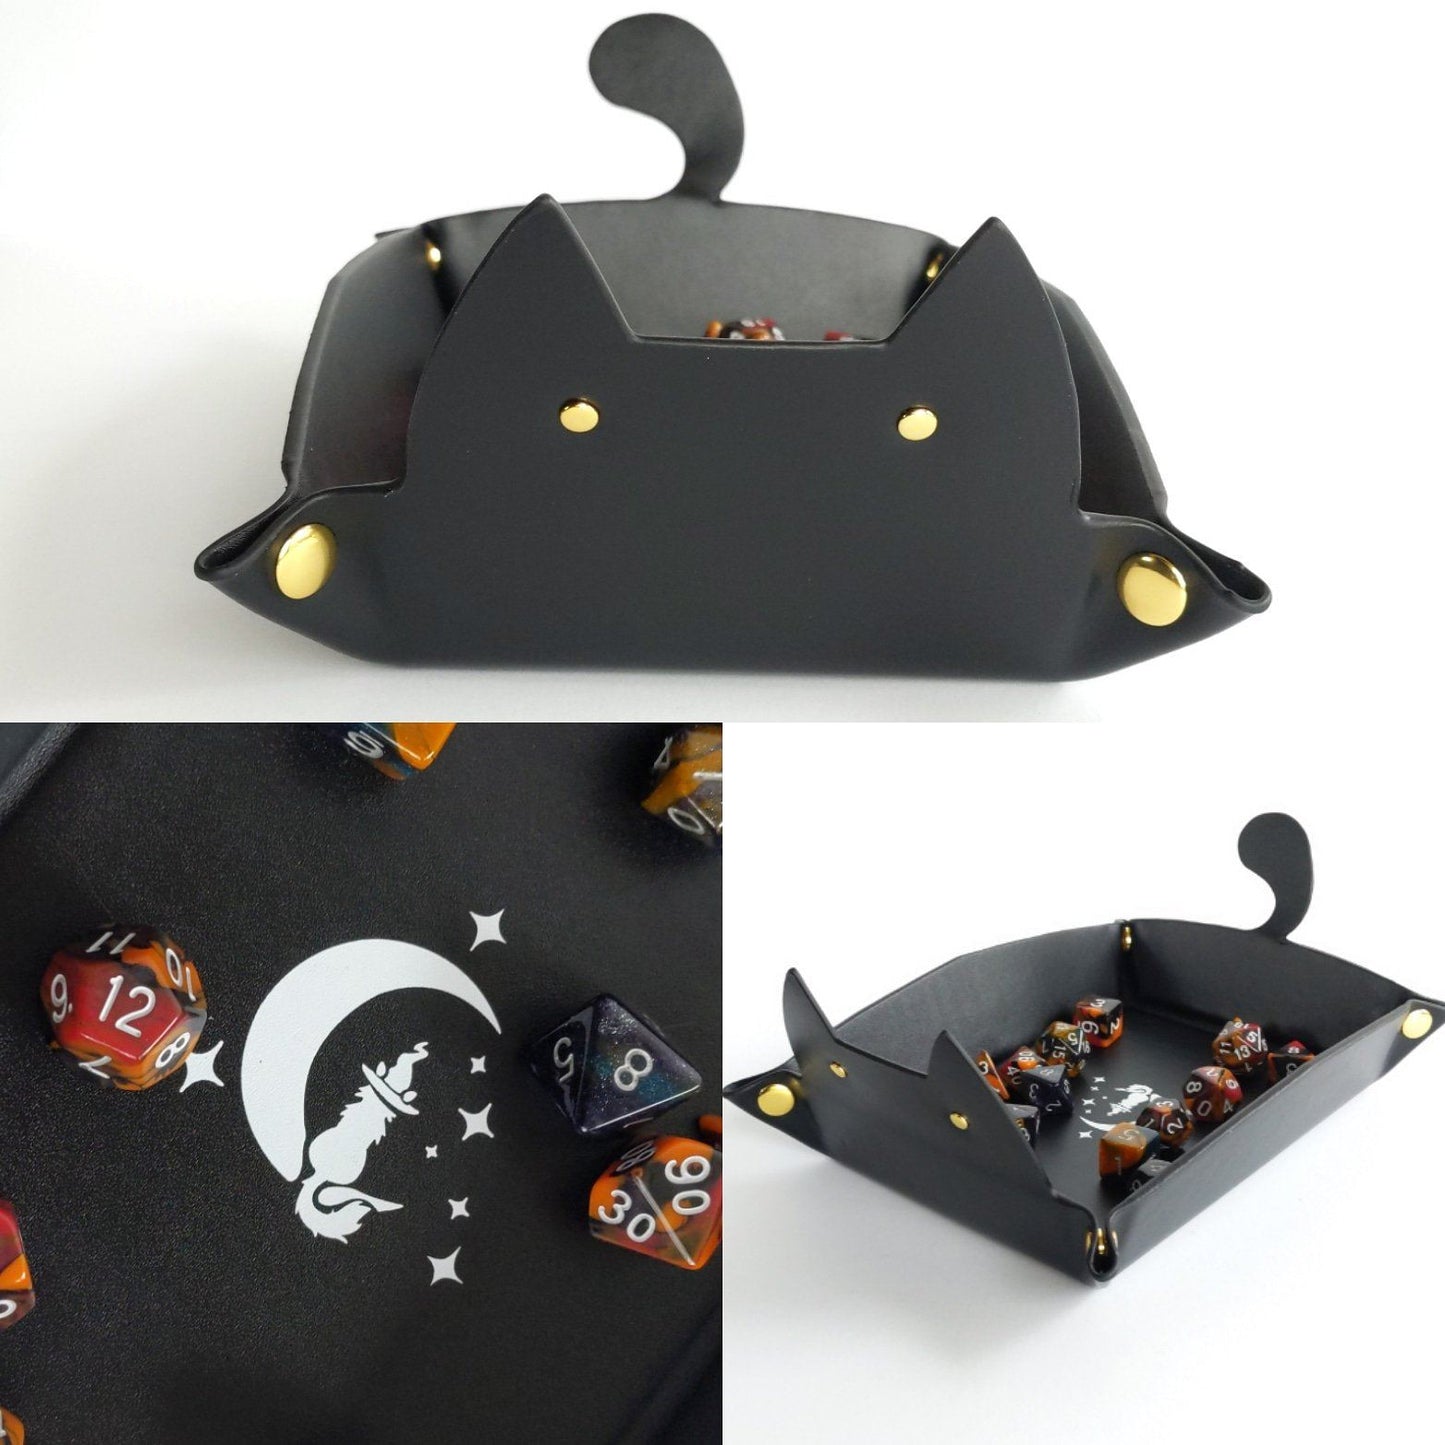 Cat Dice Rolling Tray by CozyGamer - CozyGamer